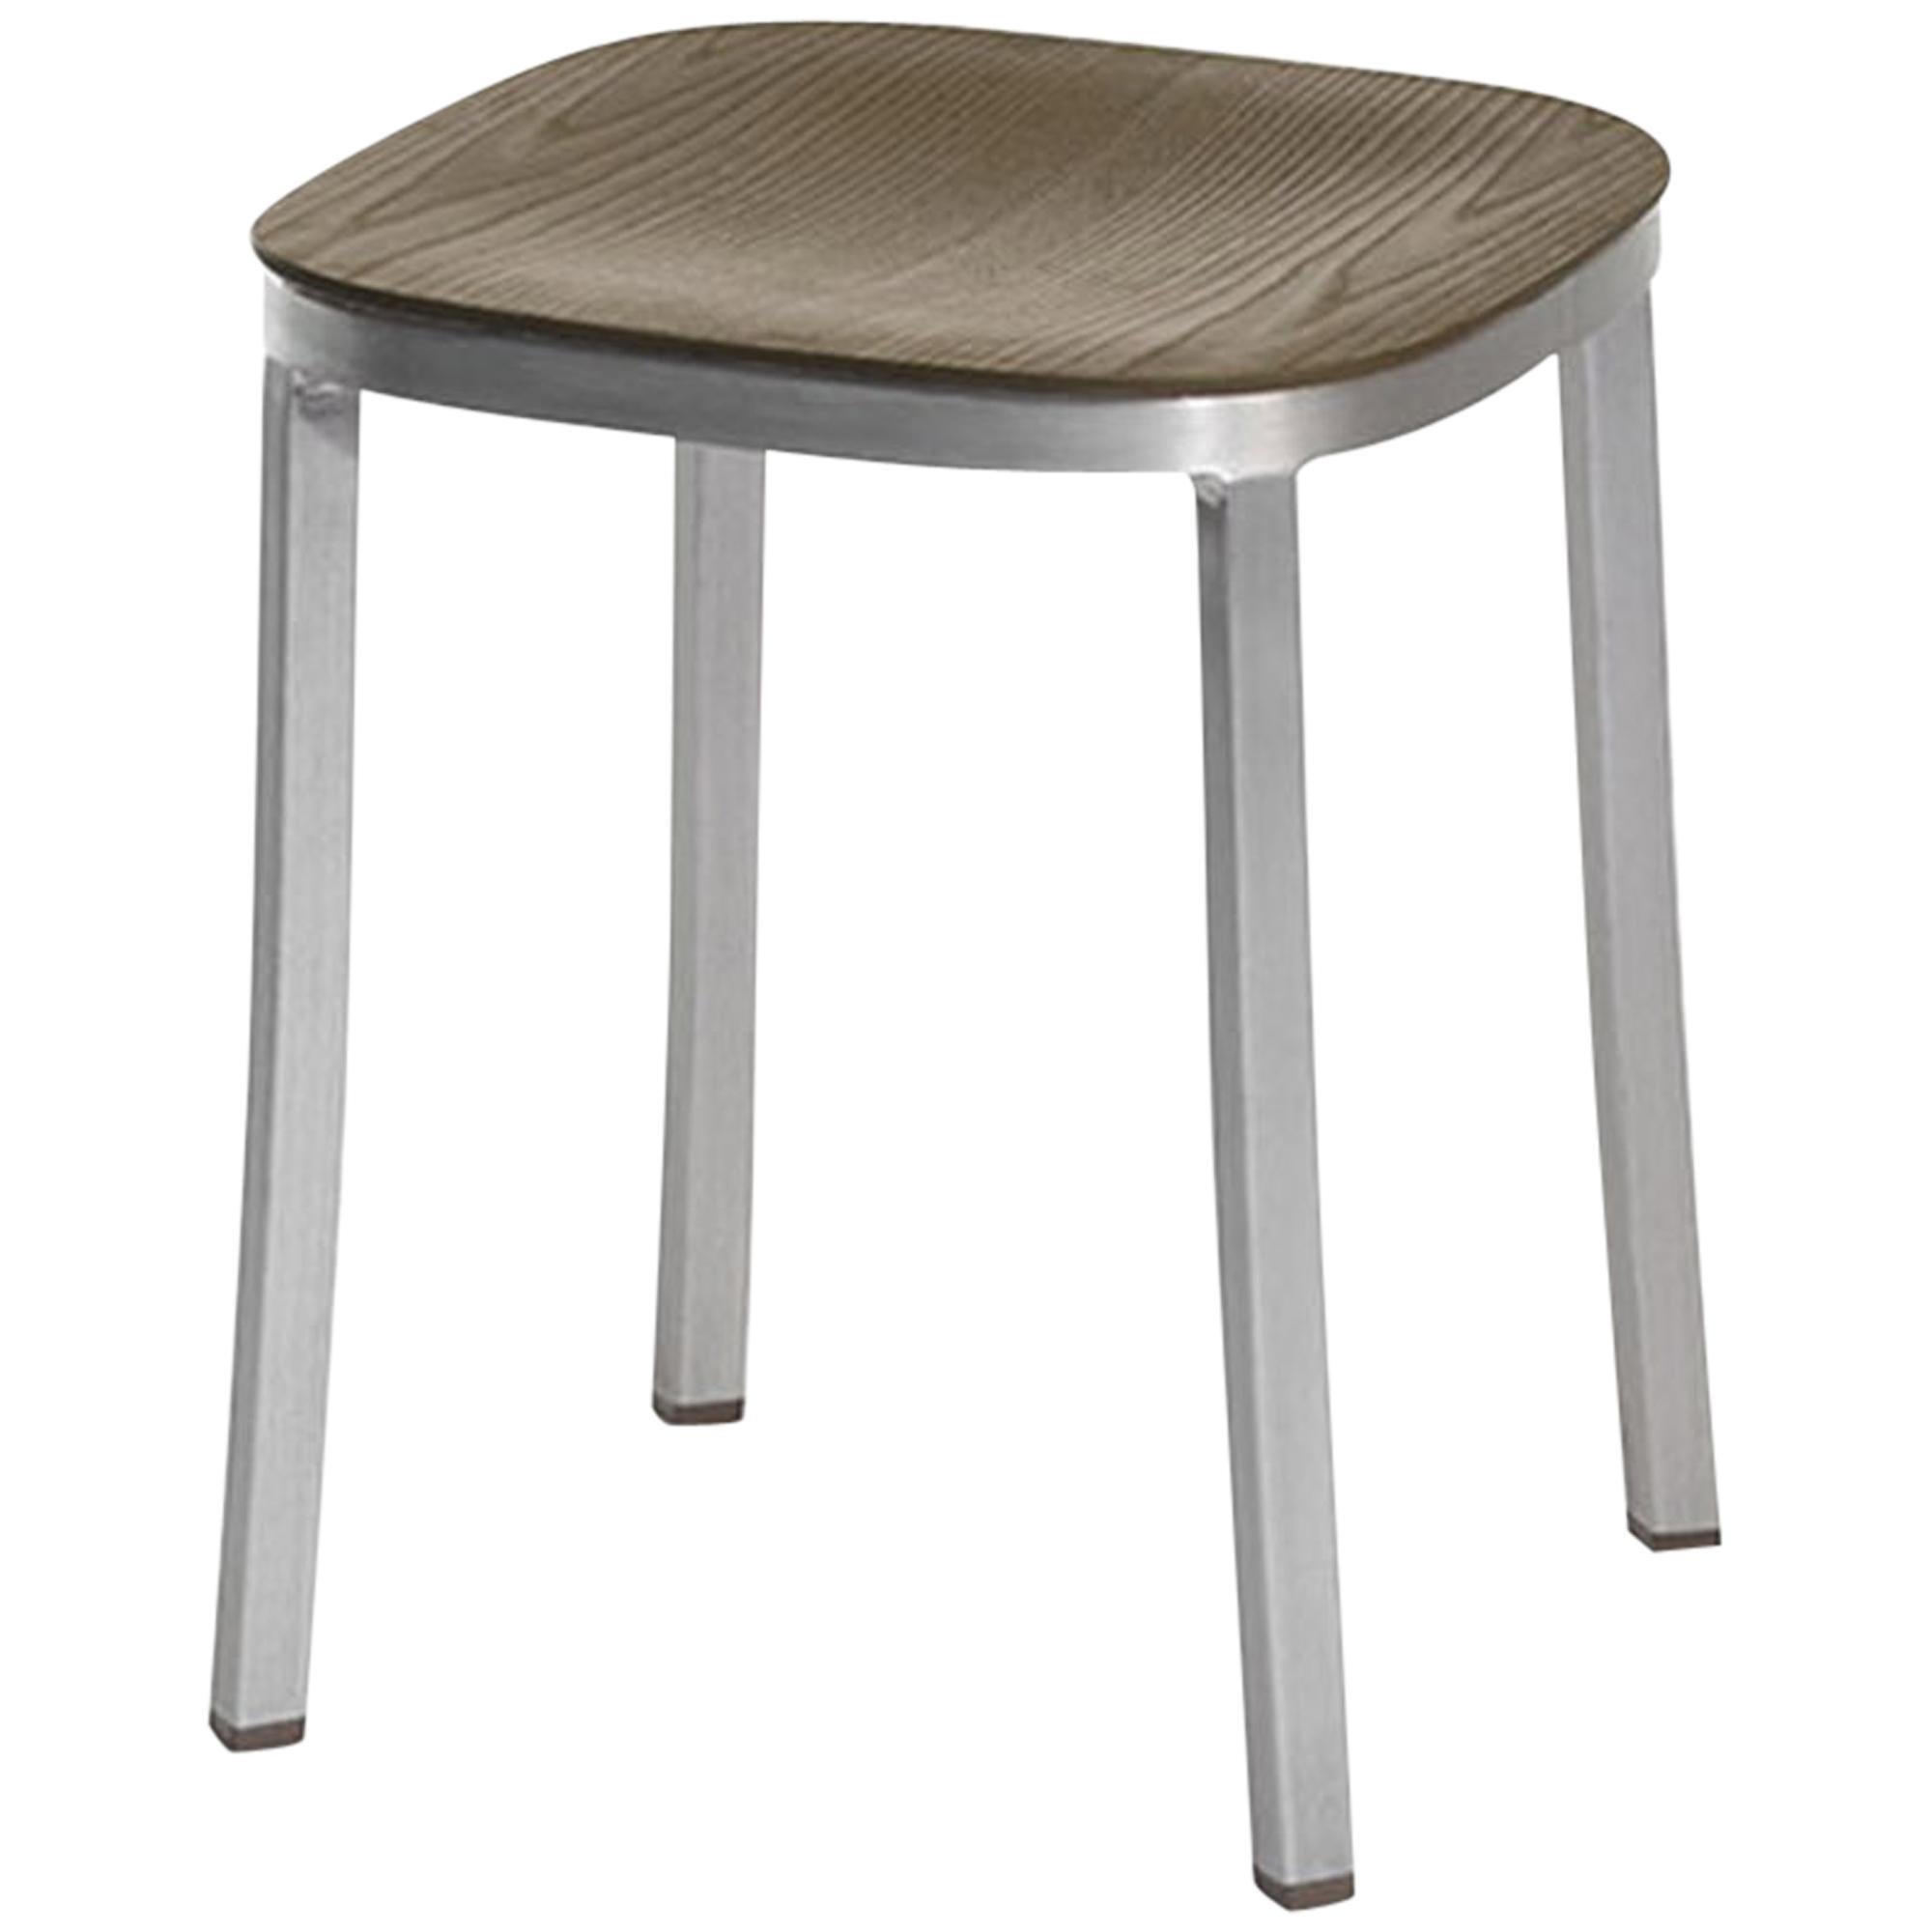 Emeco 1 Inch Small Stool in Brushed Aluminium and Walnut by Jasper Morrison